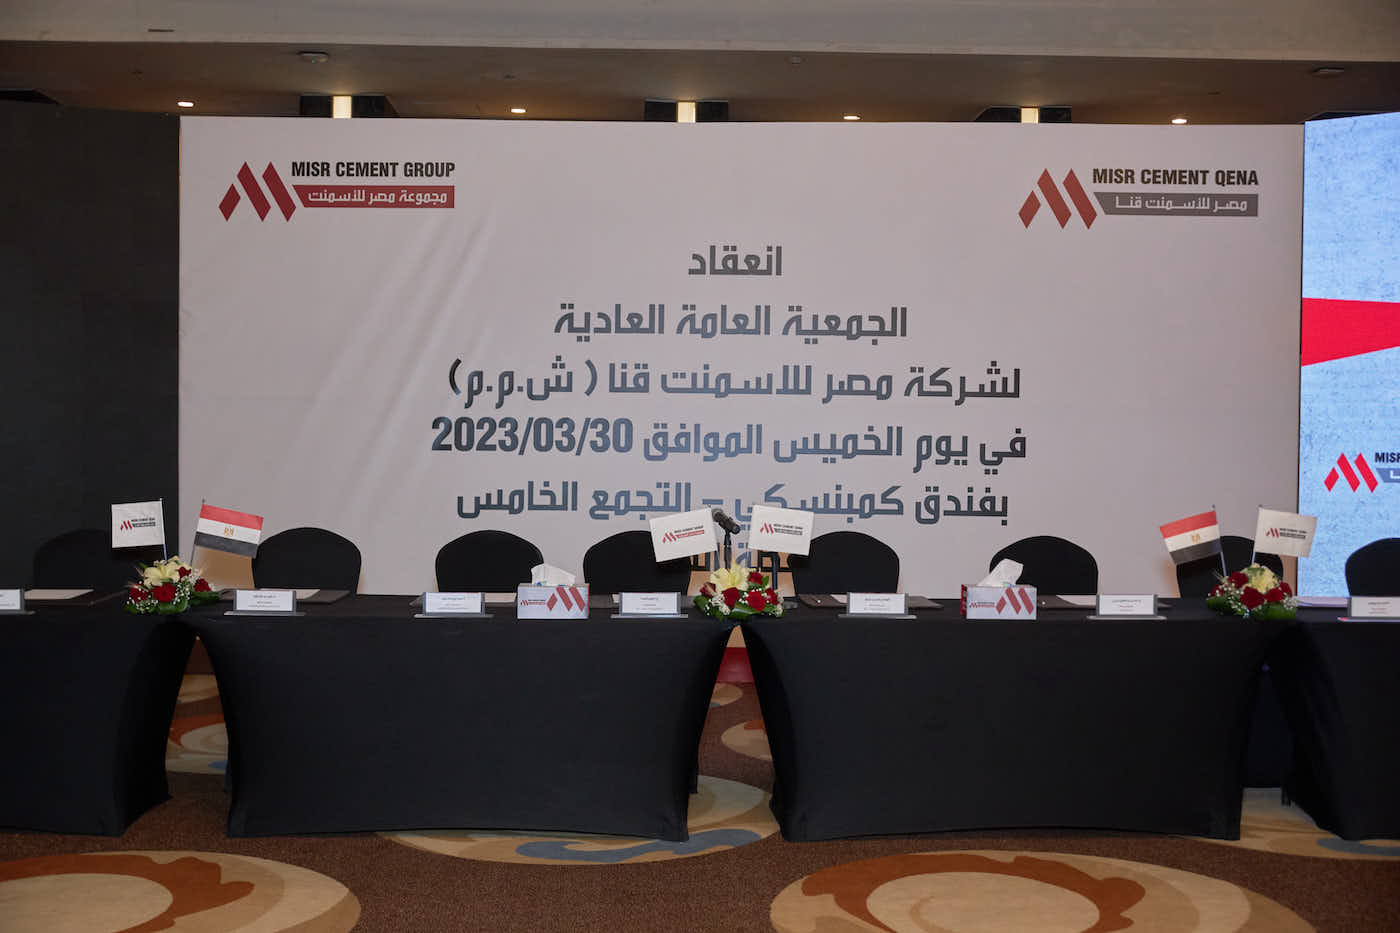 Misr Cement Group - Gallery - Misr Cement Qena Annual General Assembly 2023 - 74